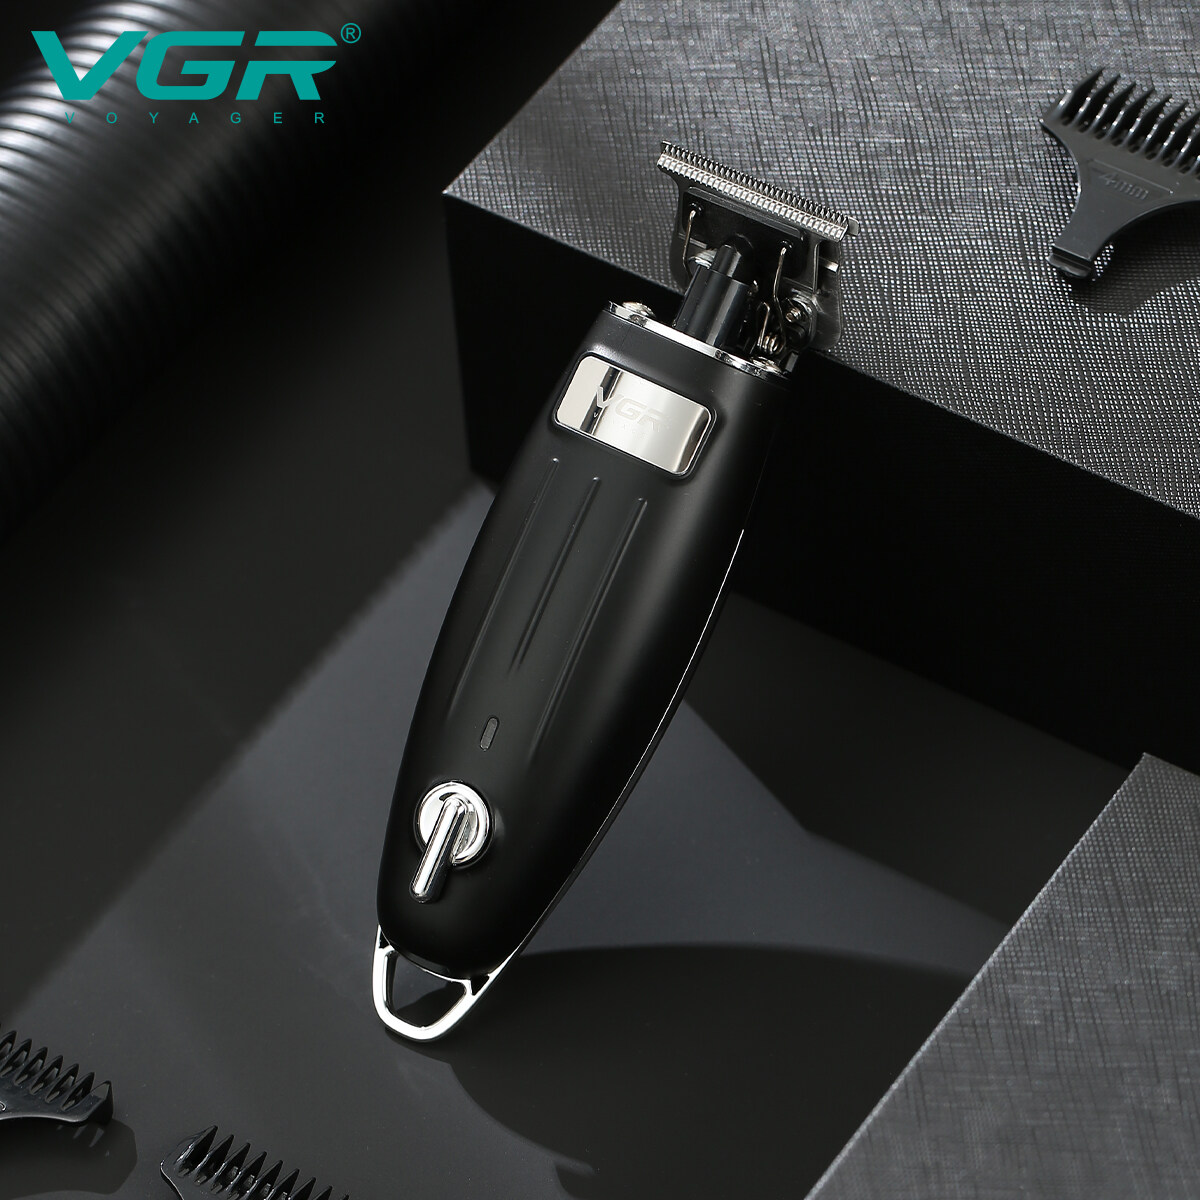 barber clippers suppliers, professional barber clippers barber supplies wholesale, hair clipper supplies near me, hair clipper supply store, customize barber clippers